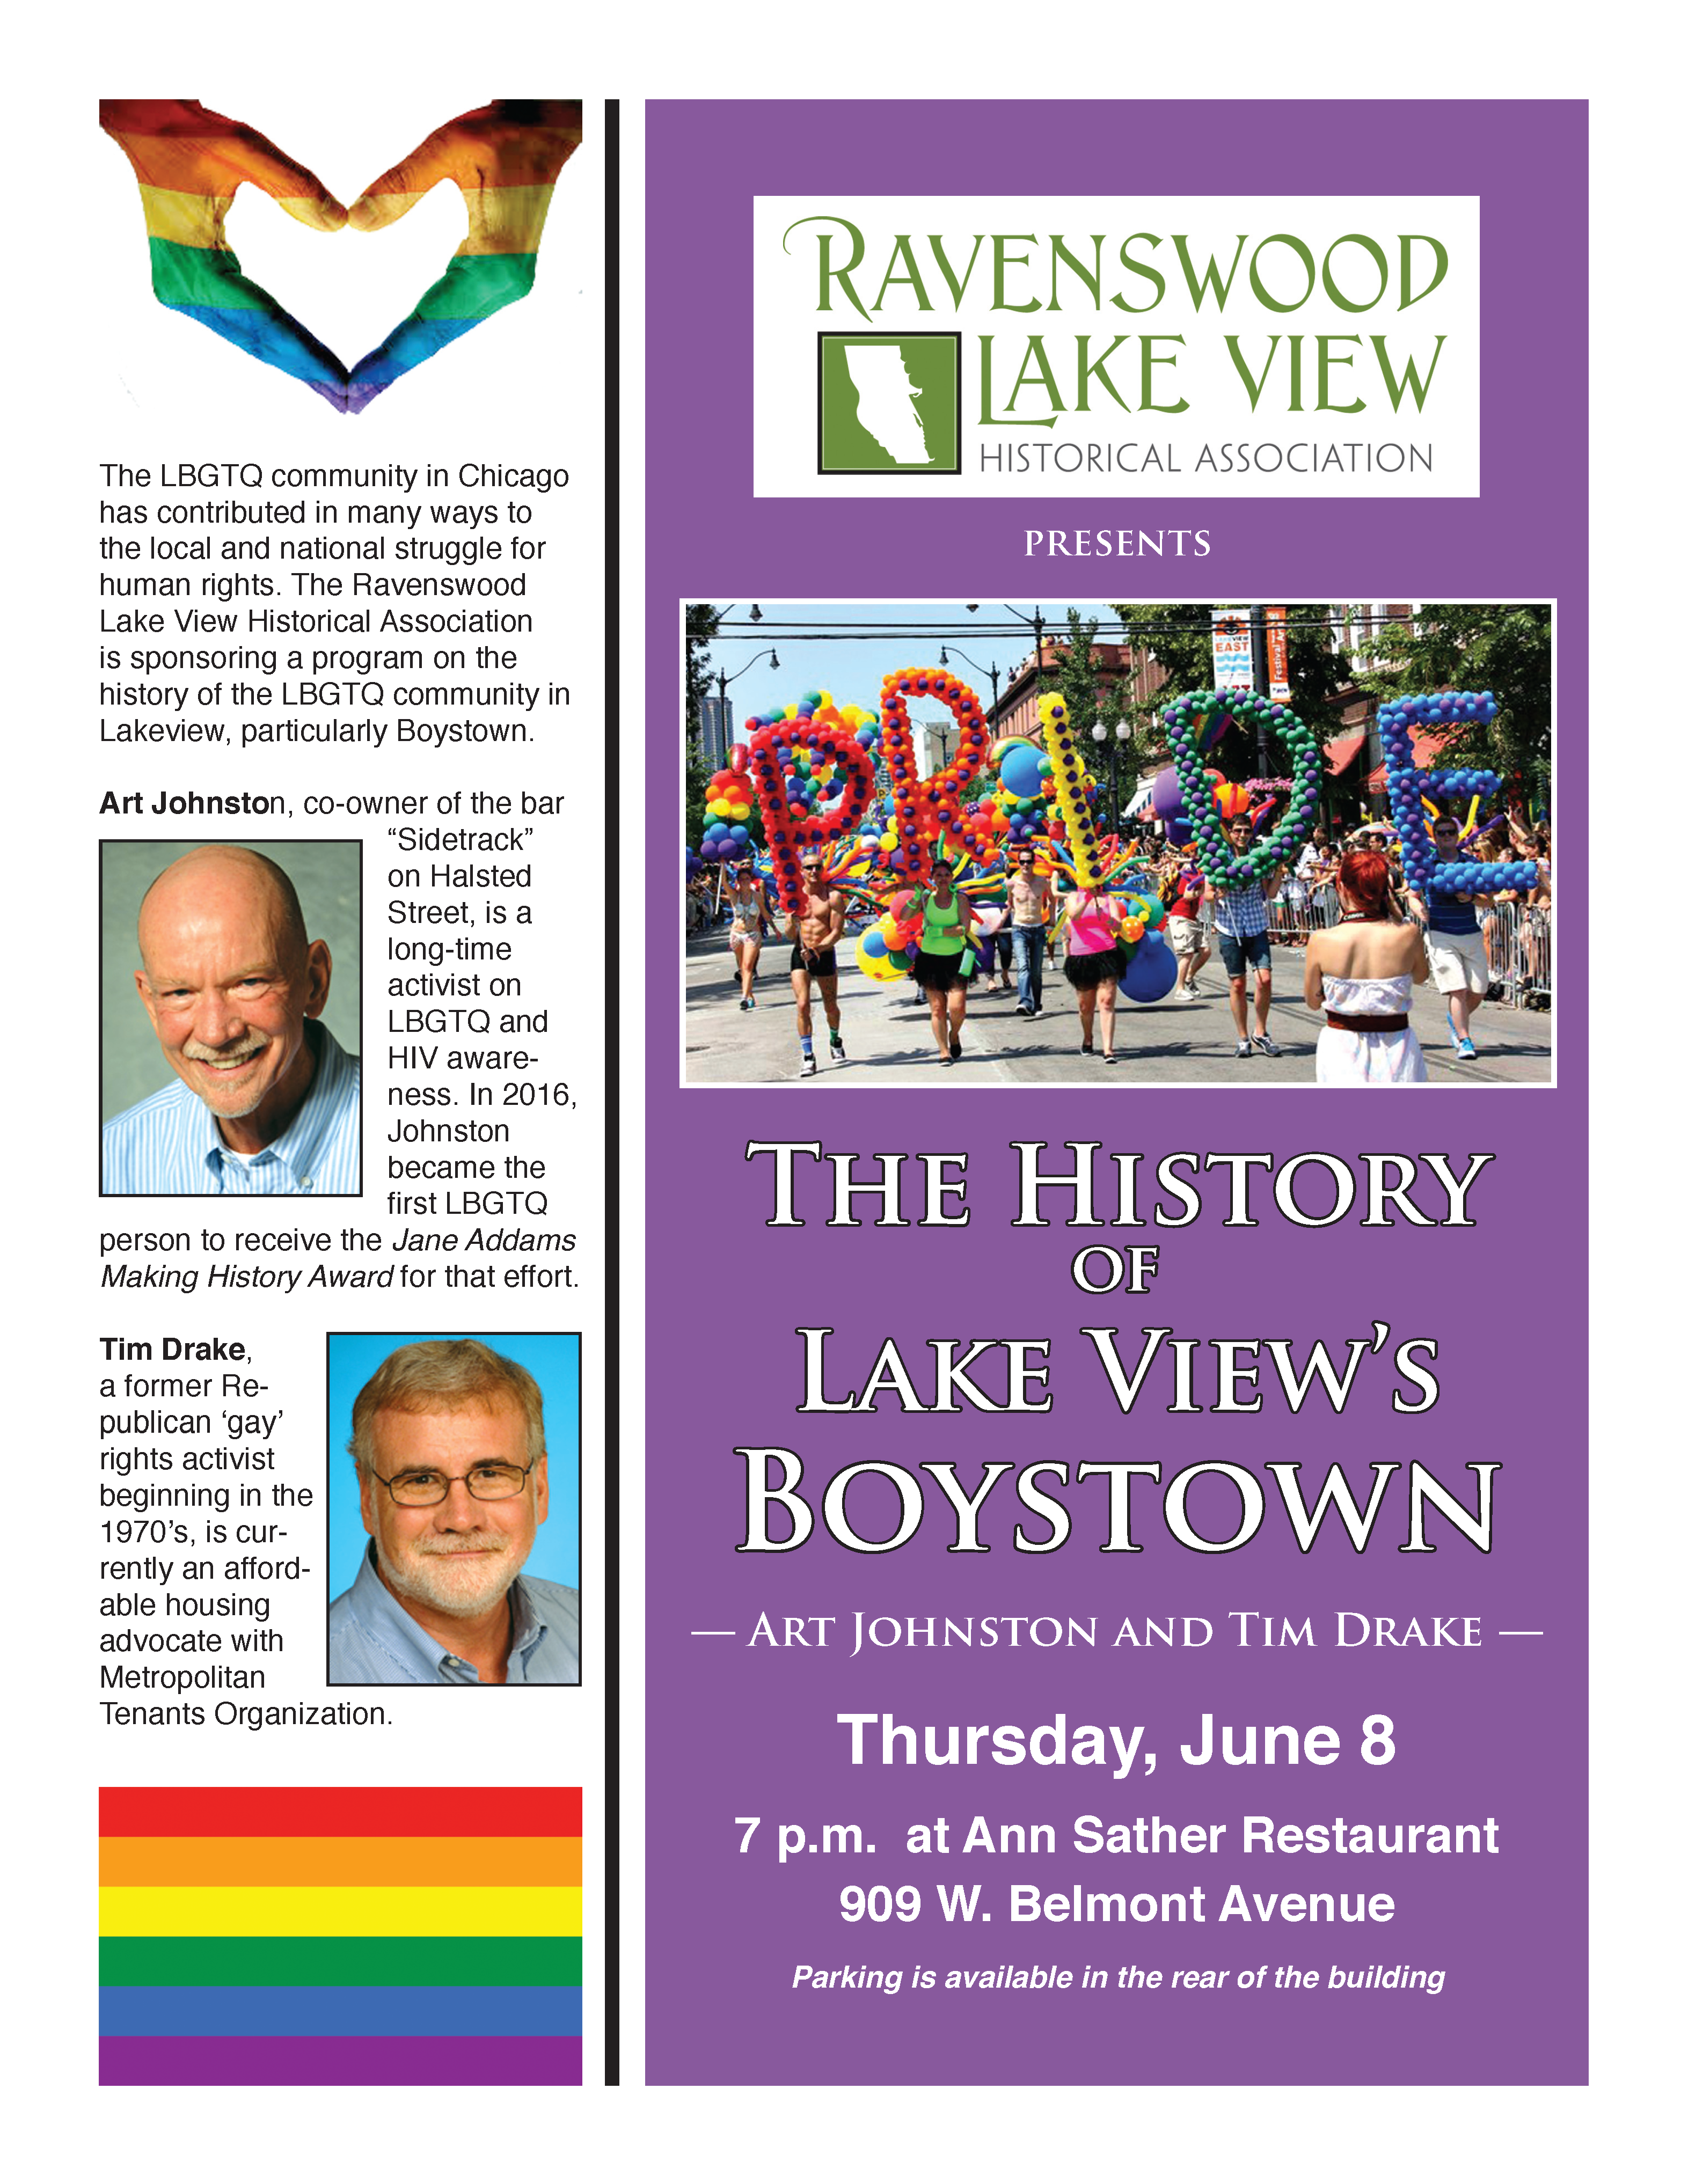 The History of Lake View's Boystown - Thursday, June 8, 7 P.M. - Ann Sather Restaurant 909 W. Belmont Avenue